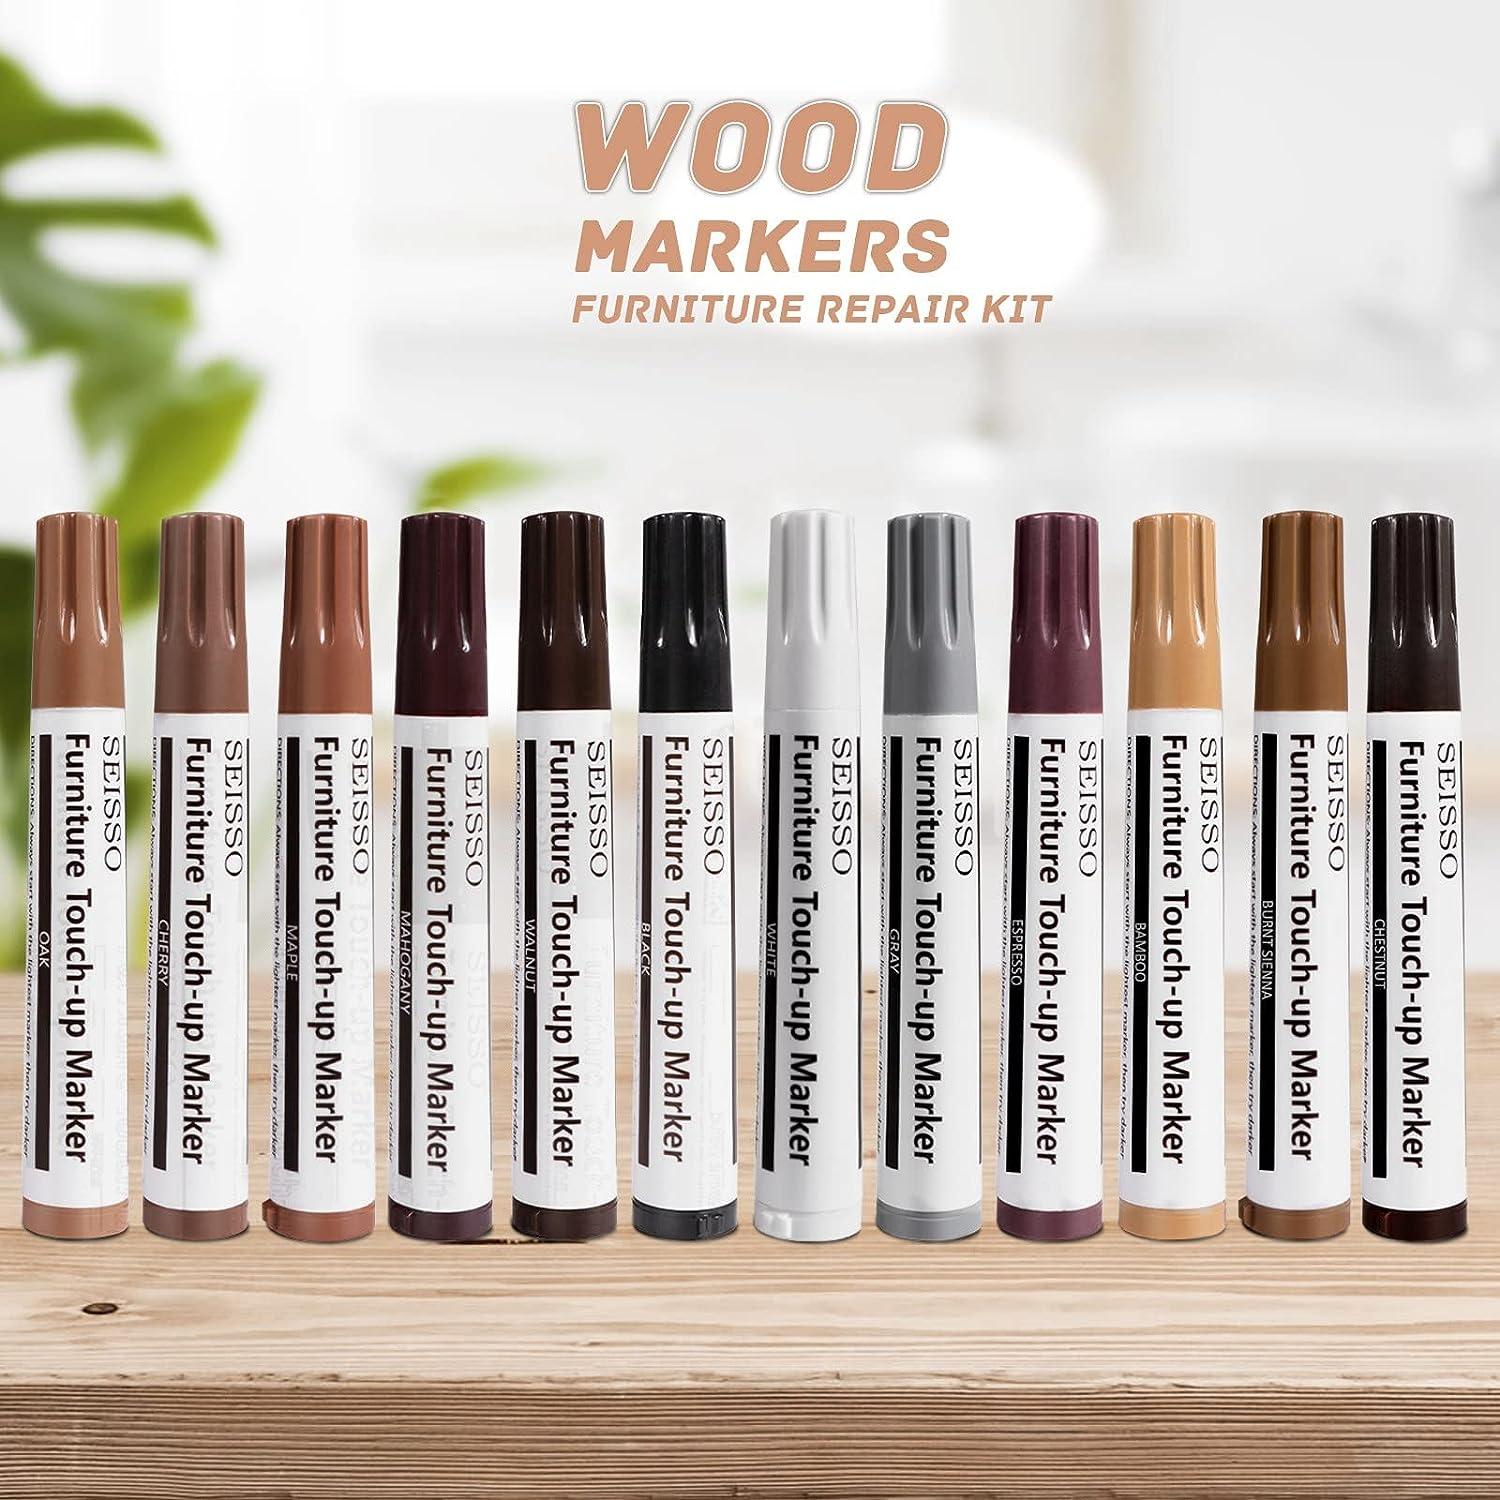 SEISSO Furniture Touch Up Markers, Wood Repair Kit for Furniture, 12 Colors  Wood Touch Up Markers for Scratches, New Upgrade Furniture Repair Kit -  Restore Wooden Table, Cabinet, Floors, Door